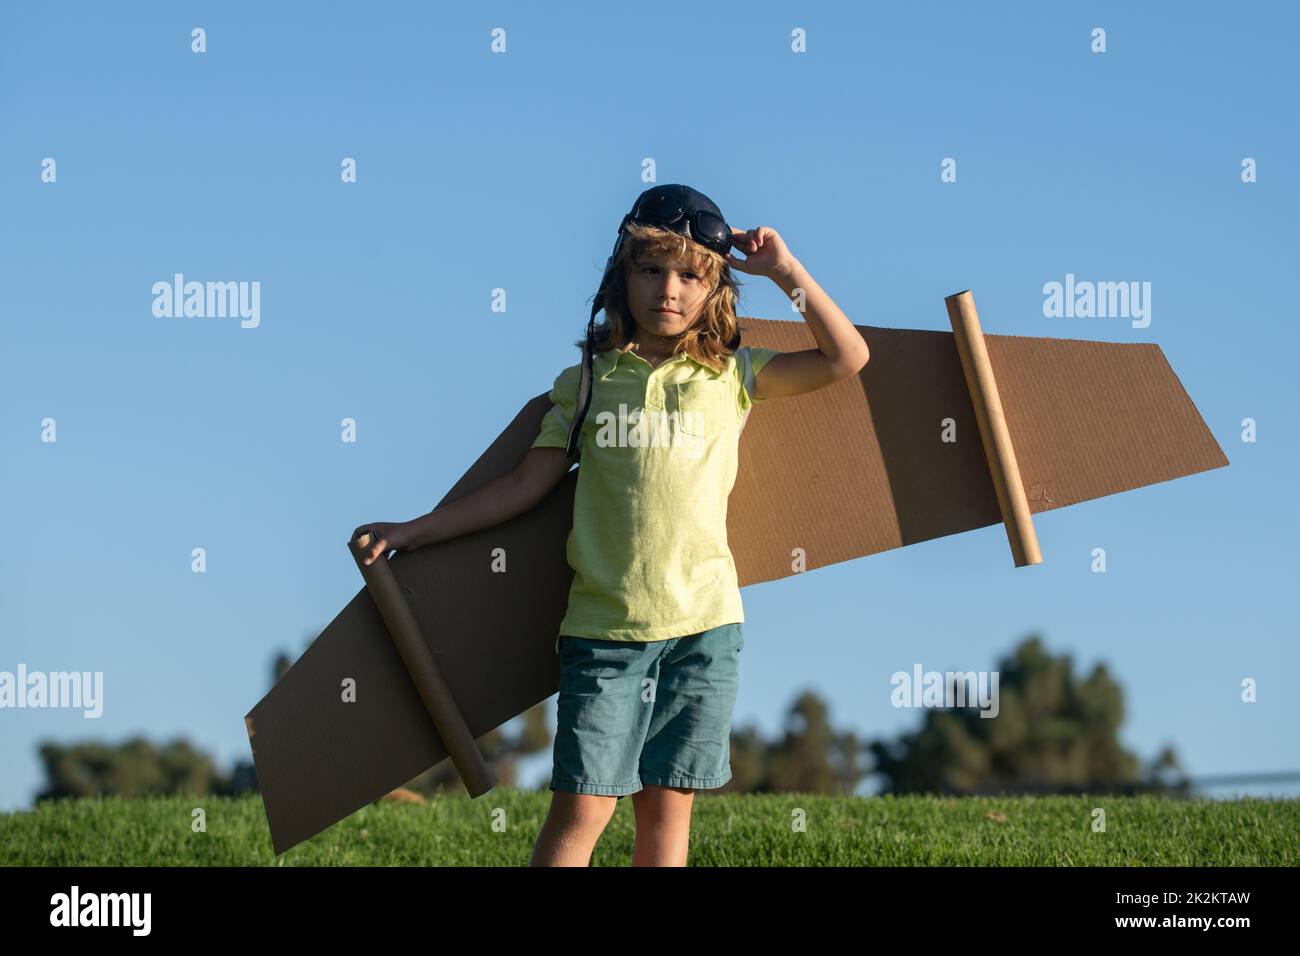 Funny boy with toy cardboard airplane wings fly. Startup freedom concept. Child wearing aviator costume outdoor. Imagines little pilot dreams of Stock Photo